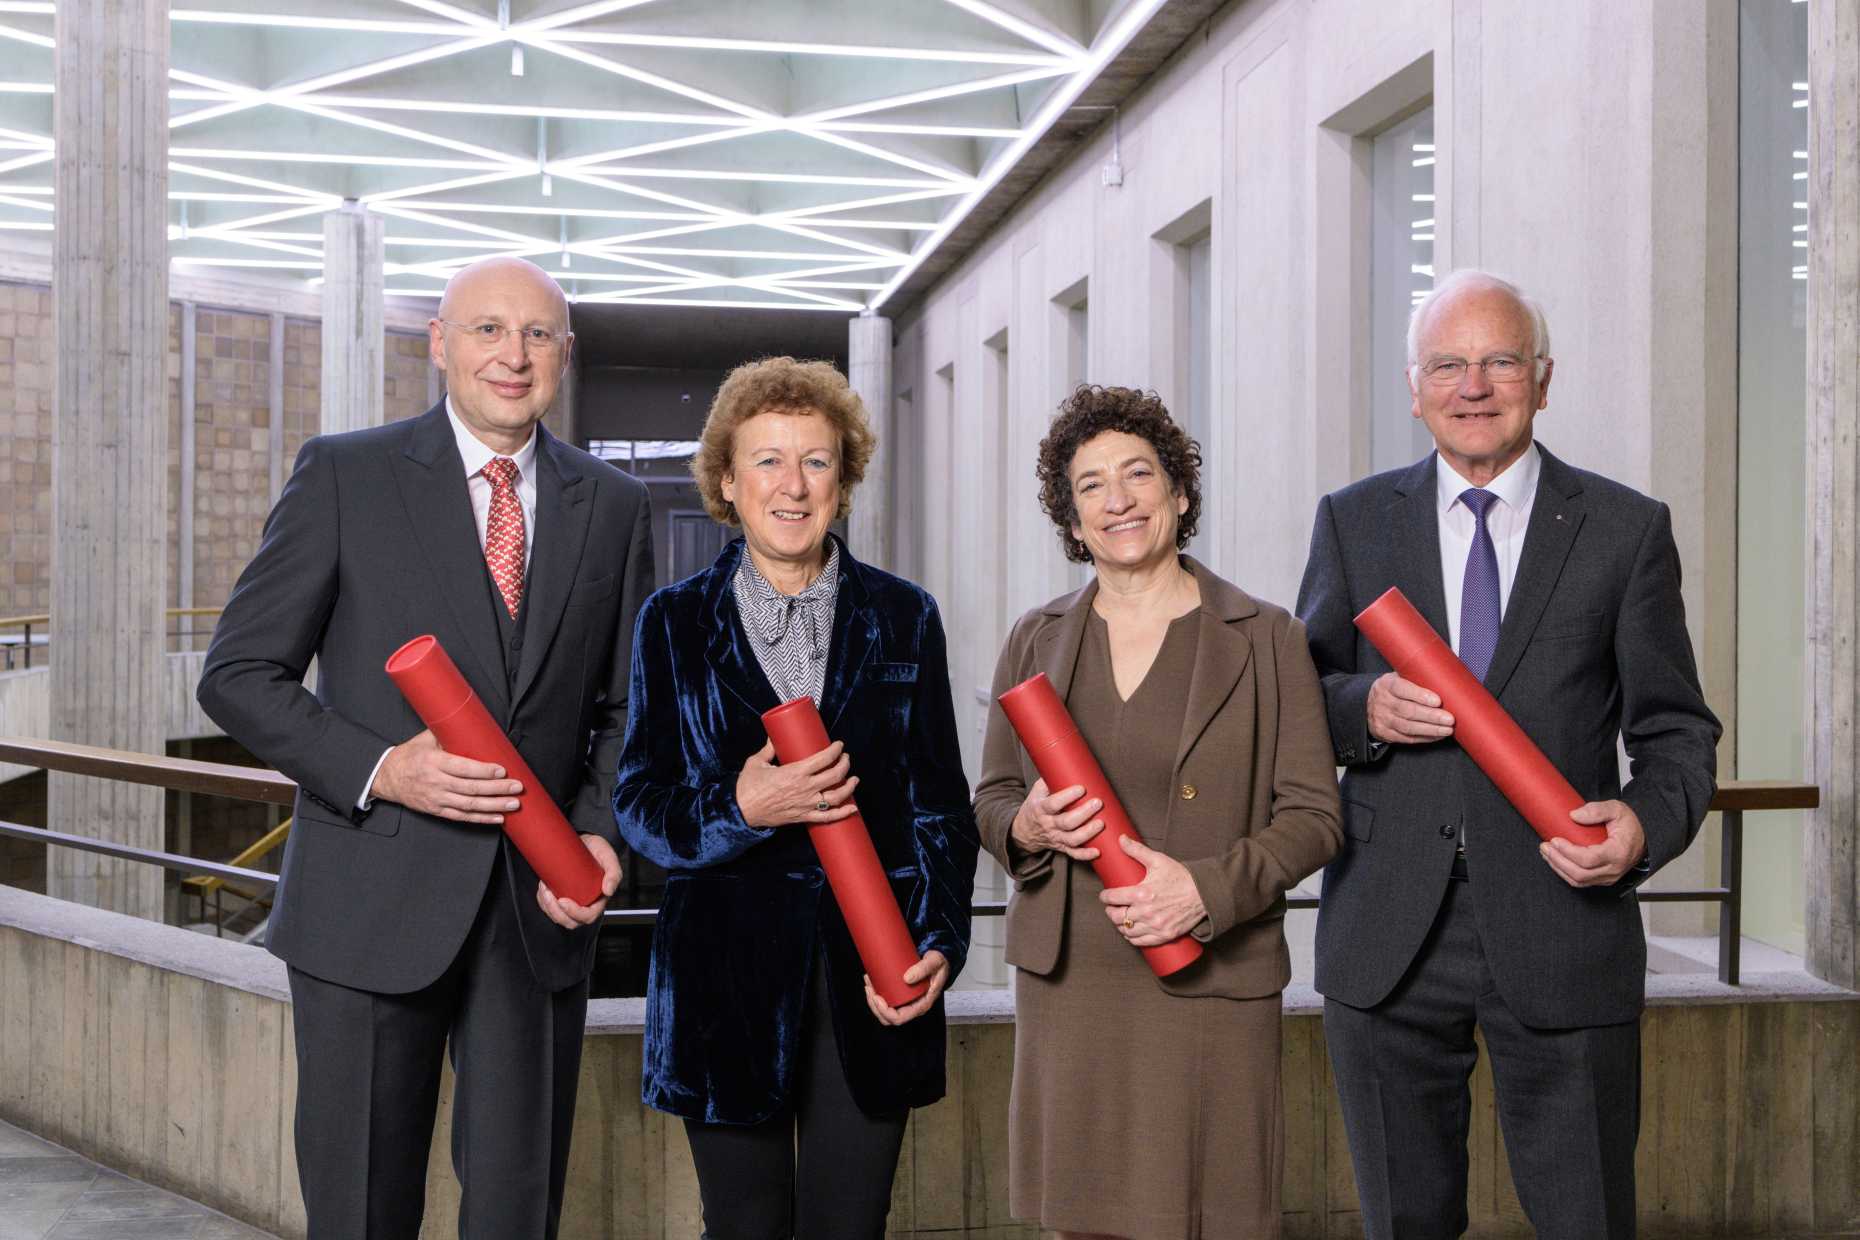 Enlarged view: Honorary doctors Prof. Dr. Dr. h.c. mult. Stefan W. Hell, Prof. Dr. Lia Addadi and Prof. Dr. Naomi Oreskes and honorary council Prof. Dr. Hengartner (v.l.n.r.). (Image: ETH Zurich / Oliver Bartenschlager)